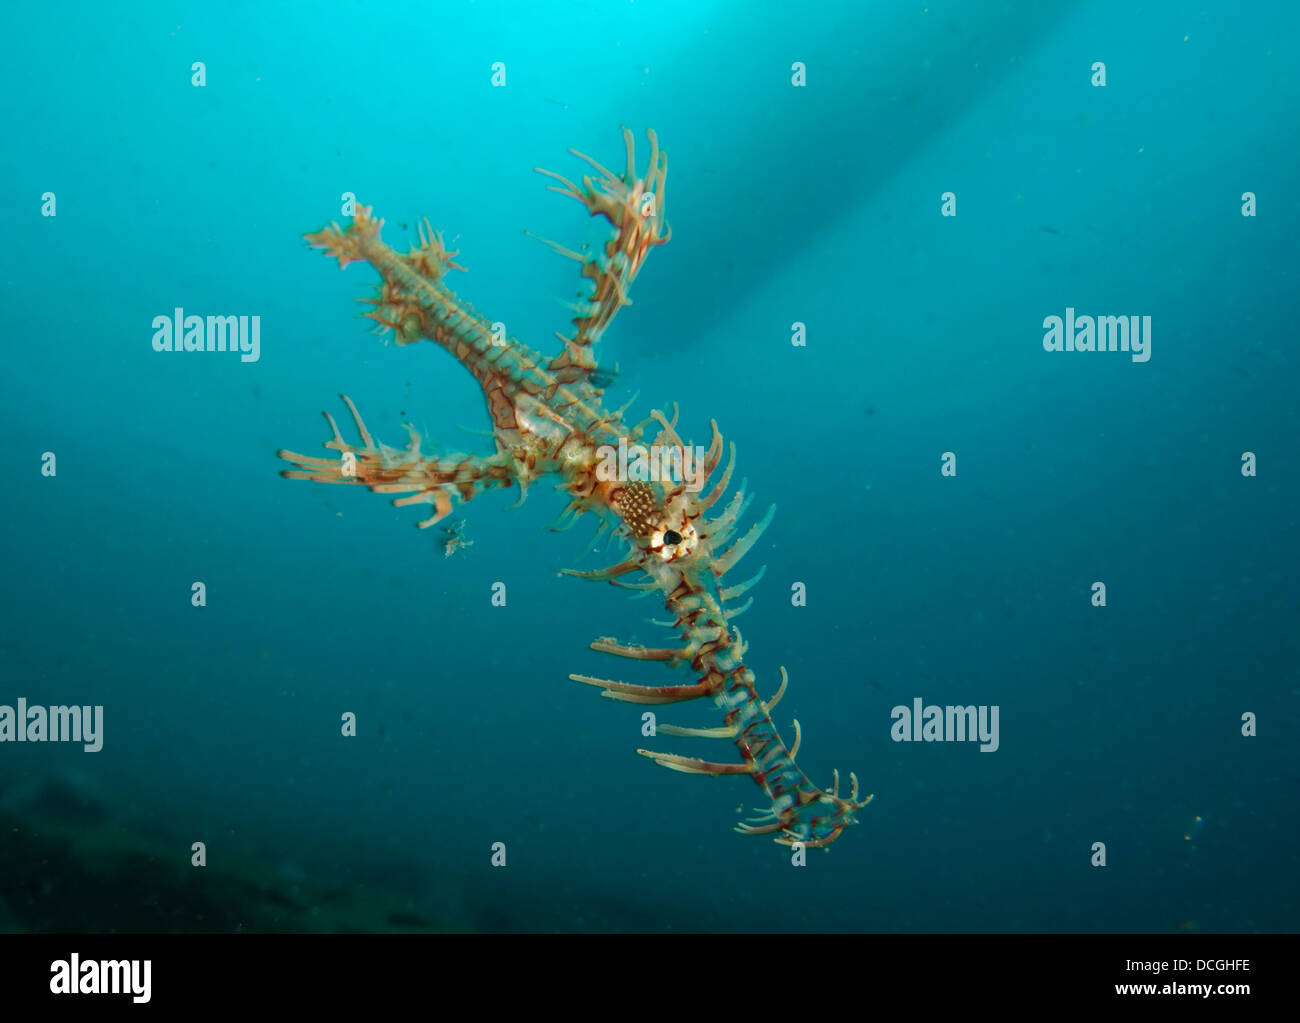 Ornate ghost pipefish (Solenostomus paradoxus) with boat in background, Gorontalo, Indonesia. Stock Photo